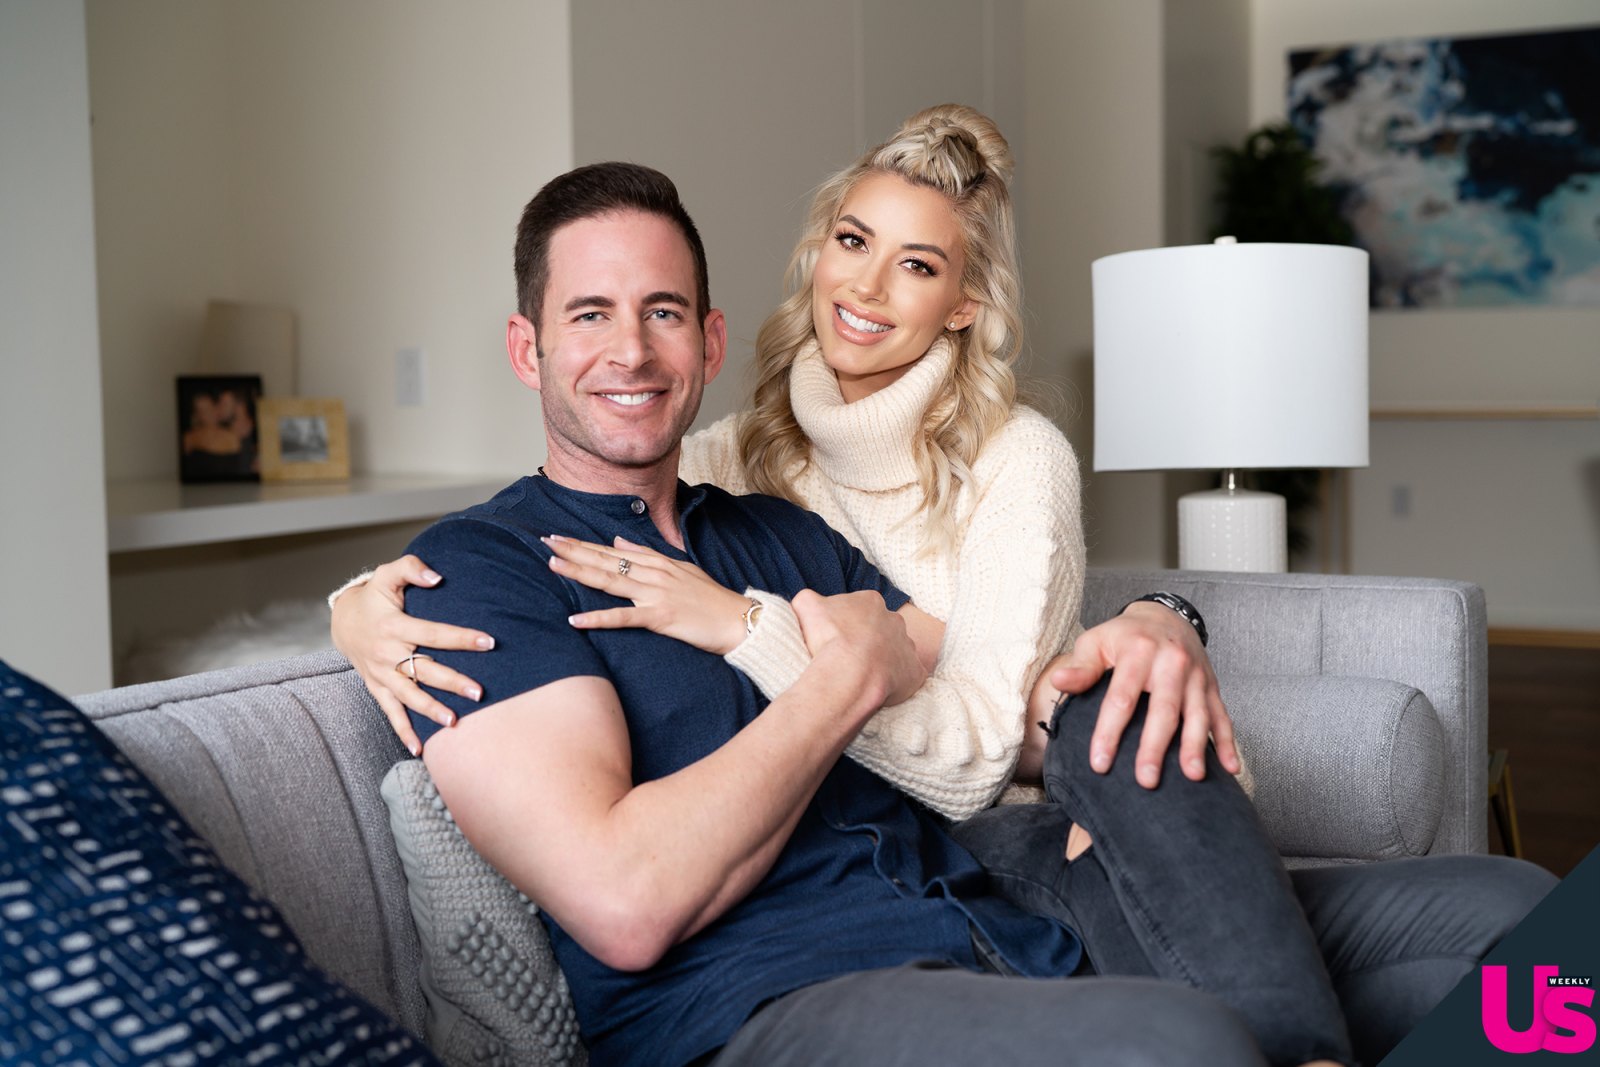 Inside Tarek El Moussa And Girlfriend Heather Rae Youngs Home